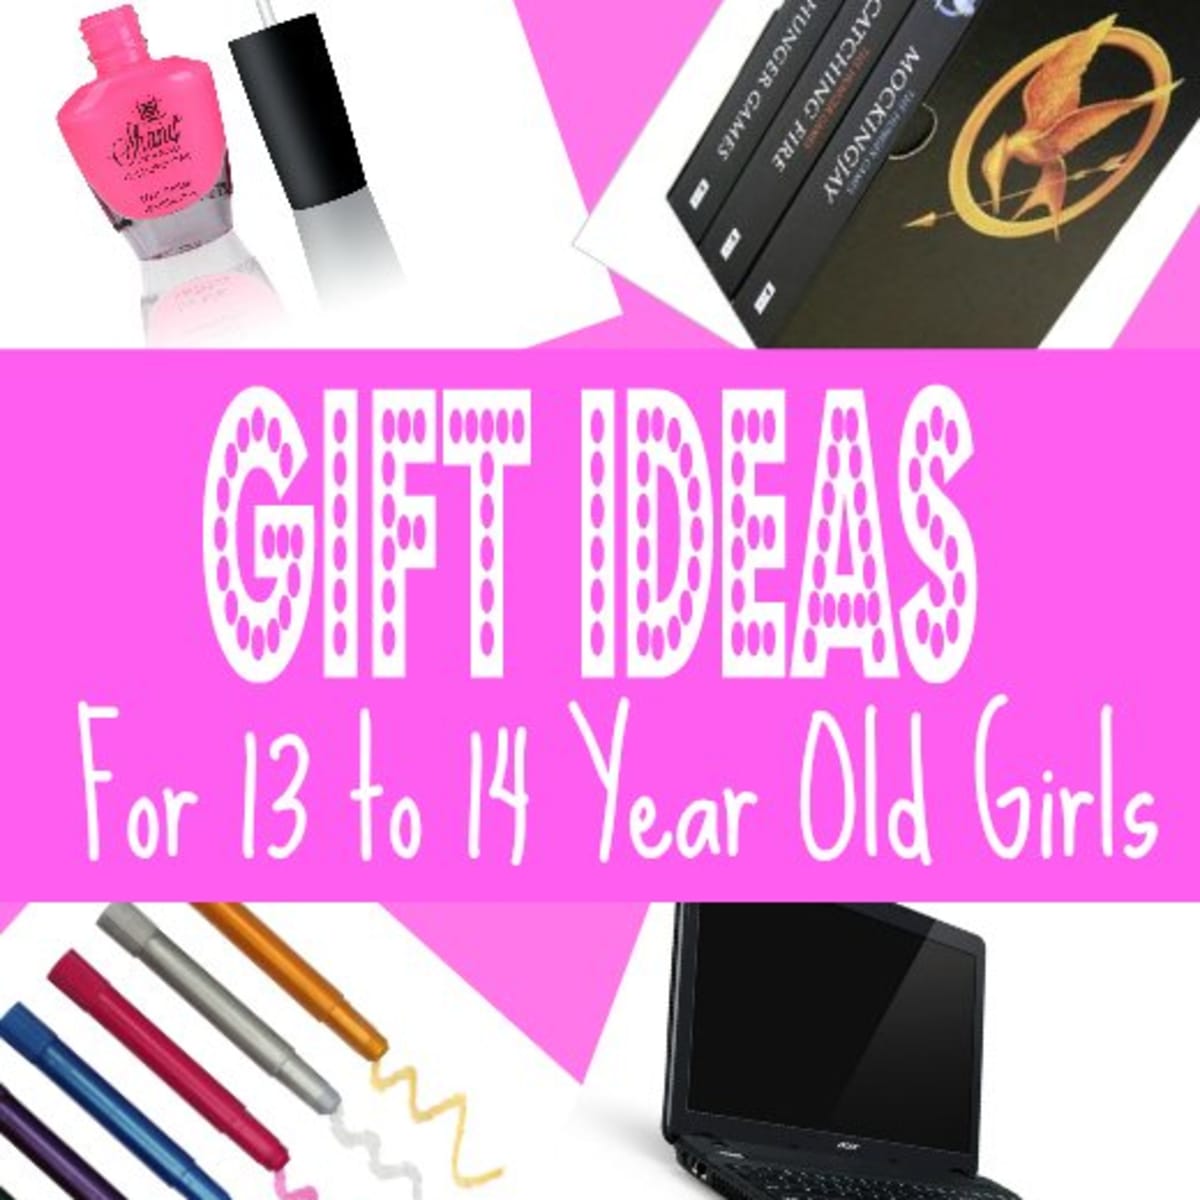 Birthday Presents For 13 Year Olds Girl Top Sellers, SAVE 58%.